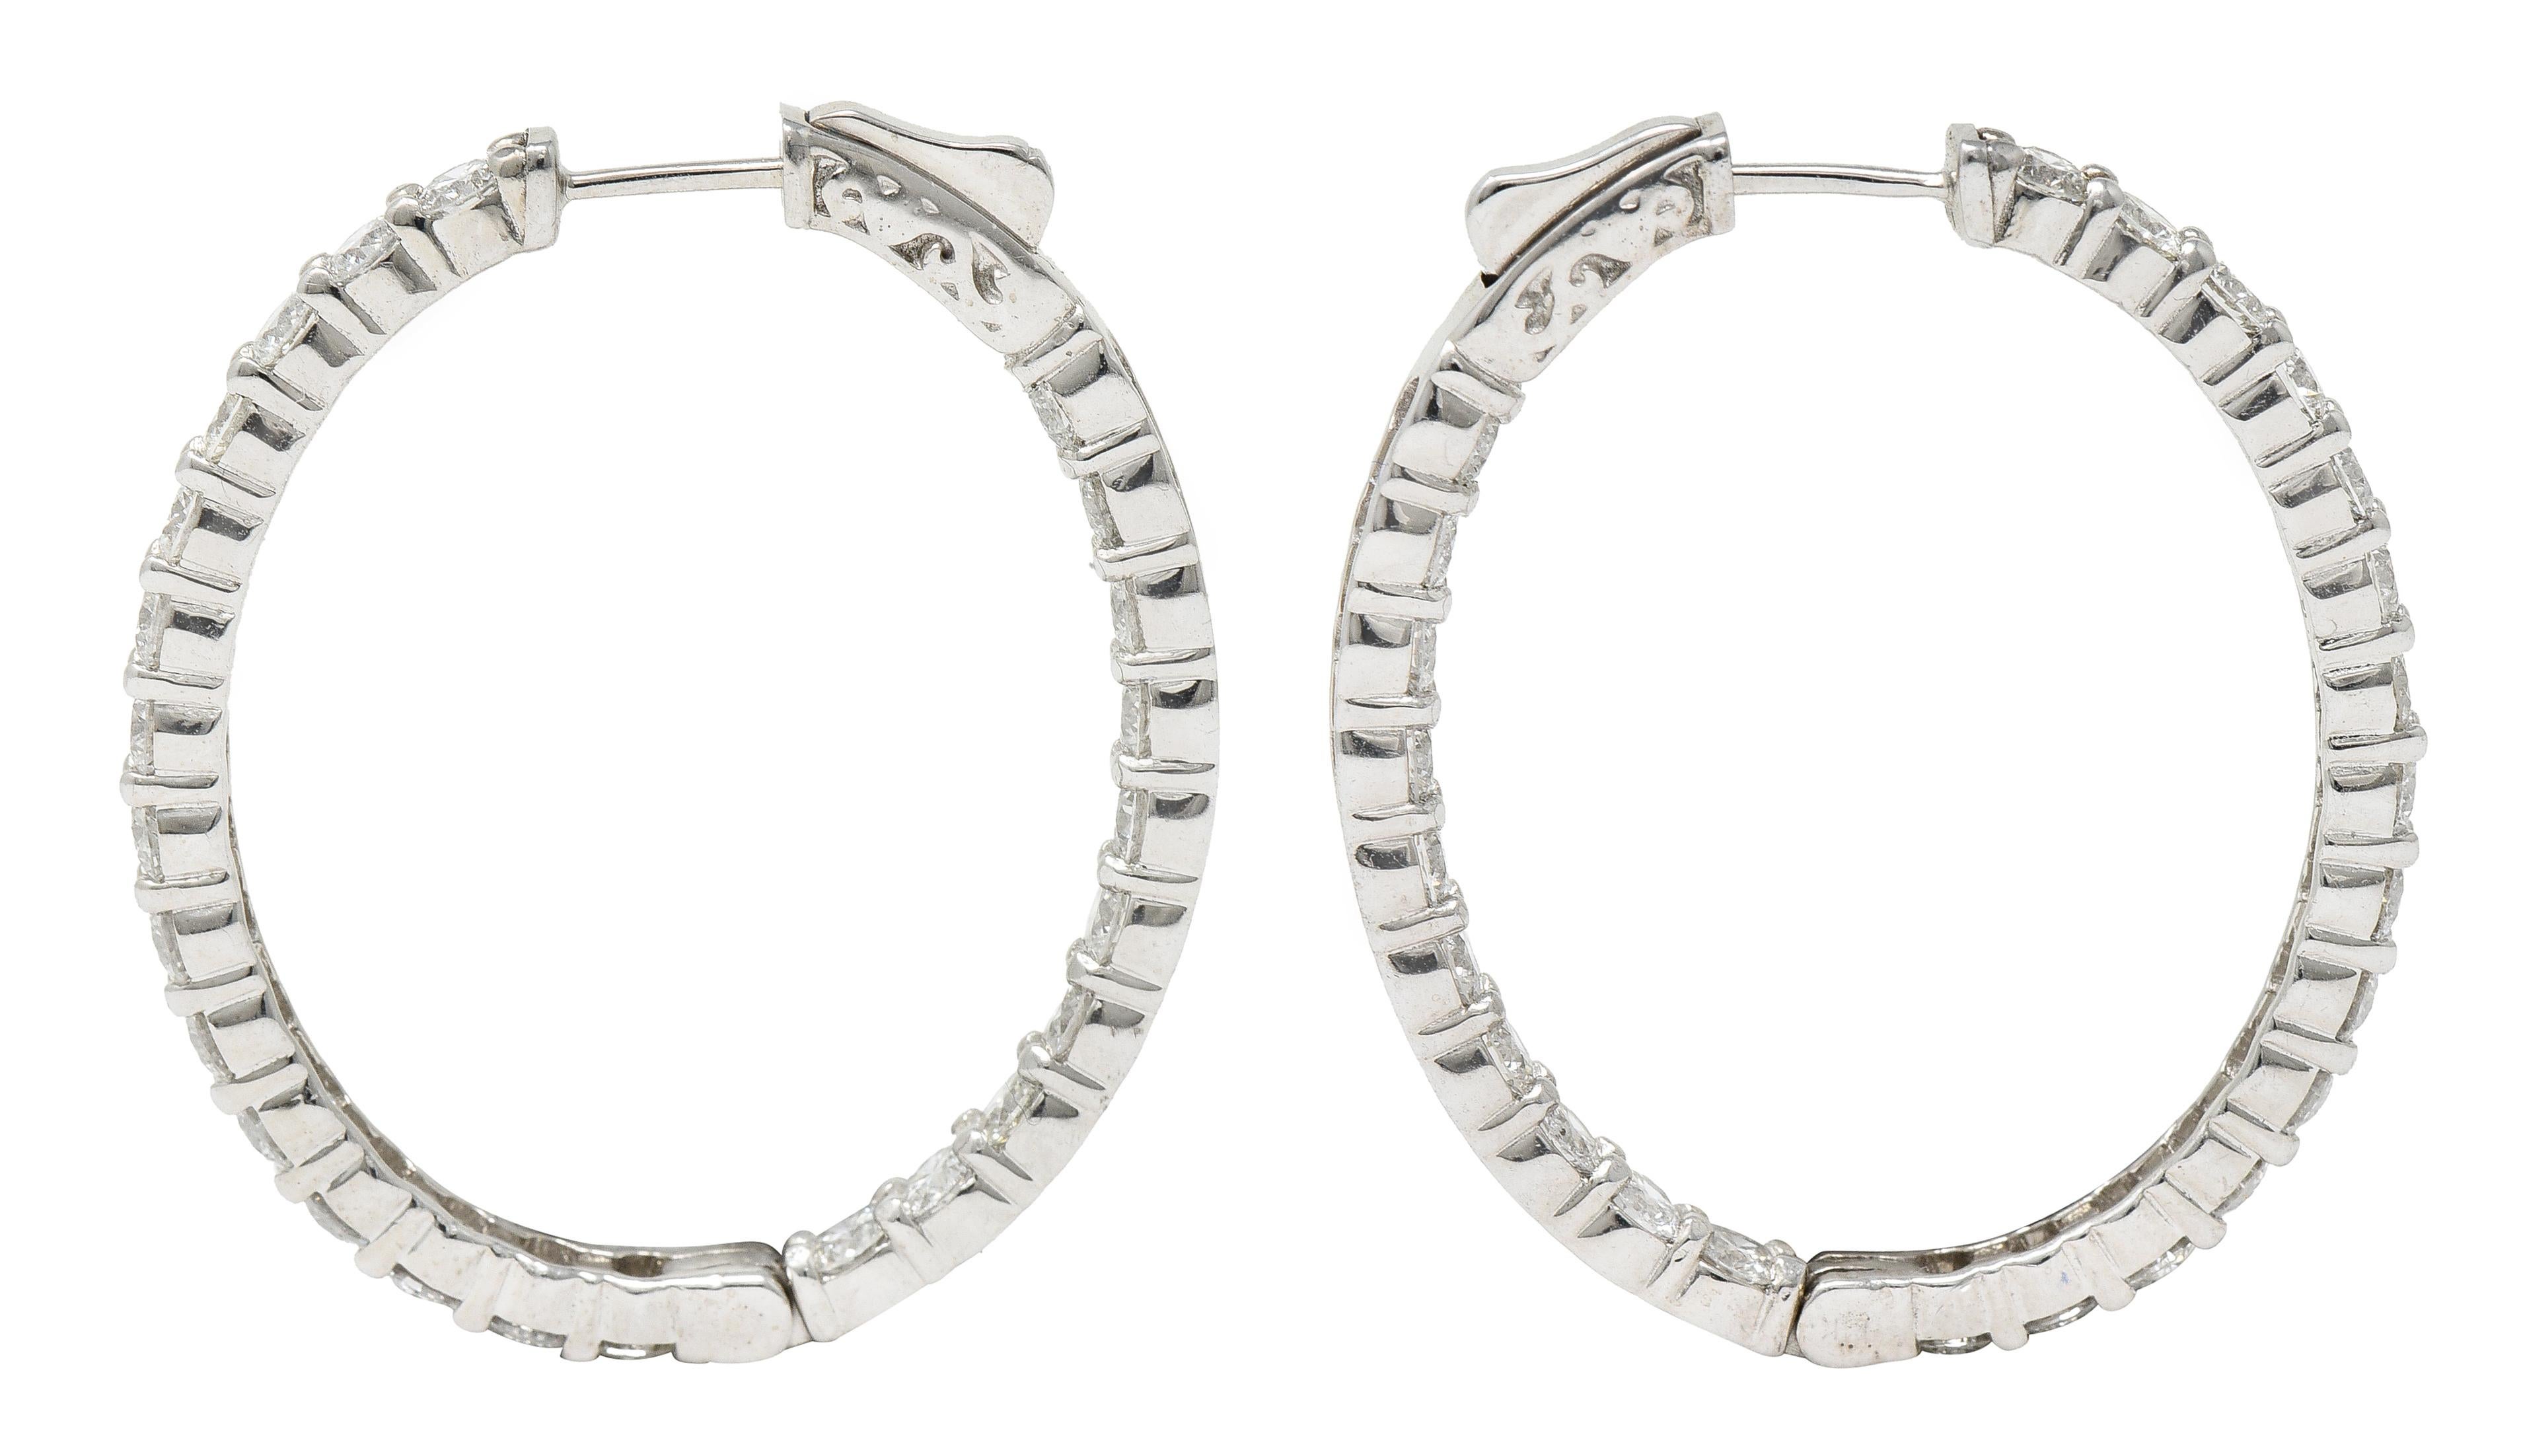 Inside/outside style oval shaped huggie hoop earrings

With shared prong round brilliant cut diamonds

Weighing in total approximately 5.04 carats - G/H color with overall VS clarity

Opens on a hinge via presser revealing posts

Inscribed with